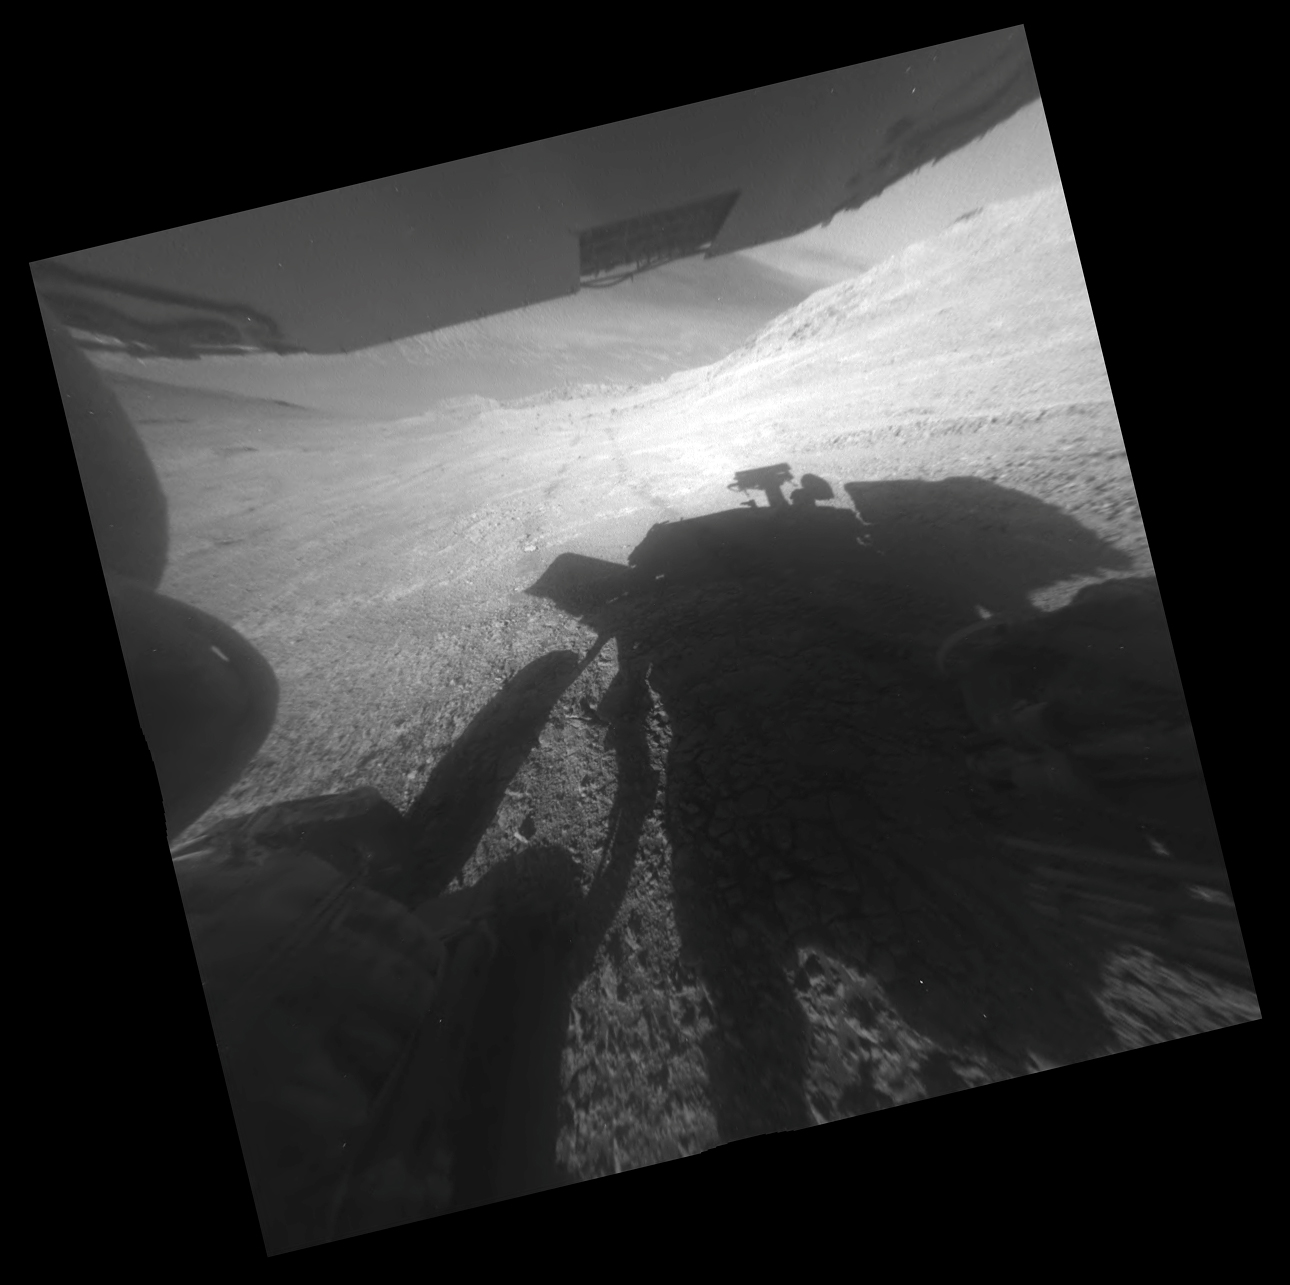 A shadow and tracks of NASA's Mars rover Opportunity appear in this March 22, 2016, image, which has been rotated 13.5 degrees to adjust for the tilt of the rover. The hillside descends to the left into 'Marathon Valley.' The floor of Endeavour Crater is seen beneath the underside of a solar panel.